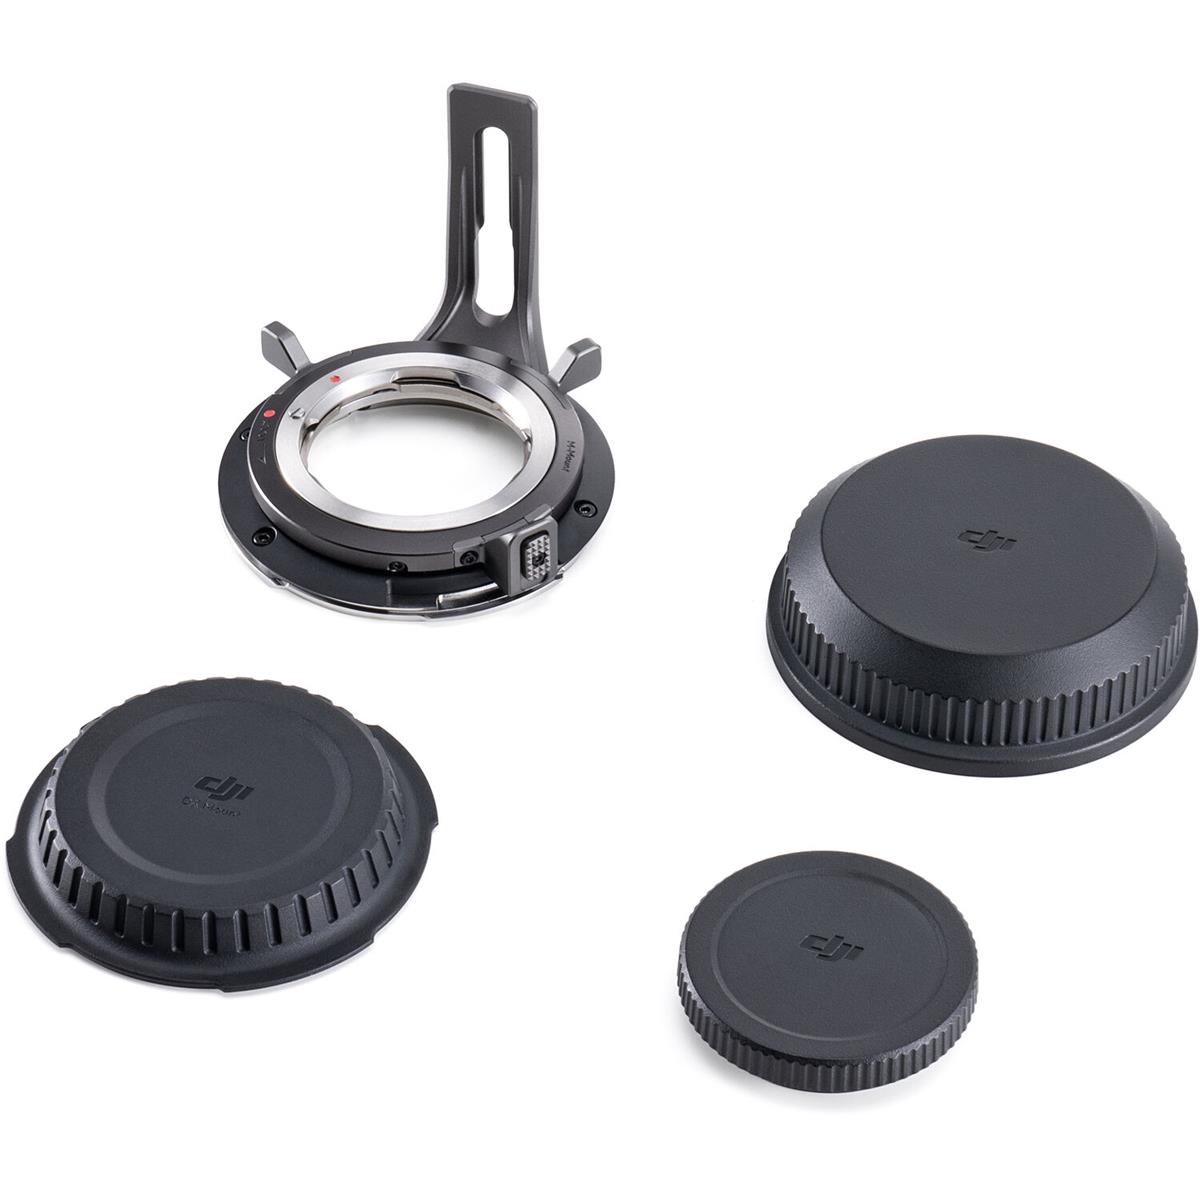 Image of DJI Leica M Lens Mount Unit for Zenmuse X9 Camera